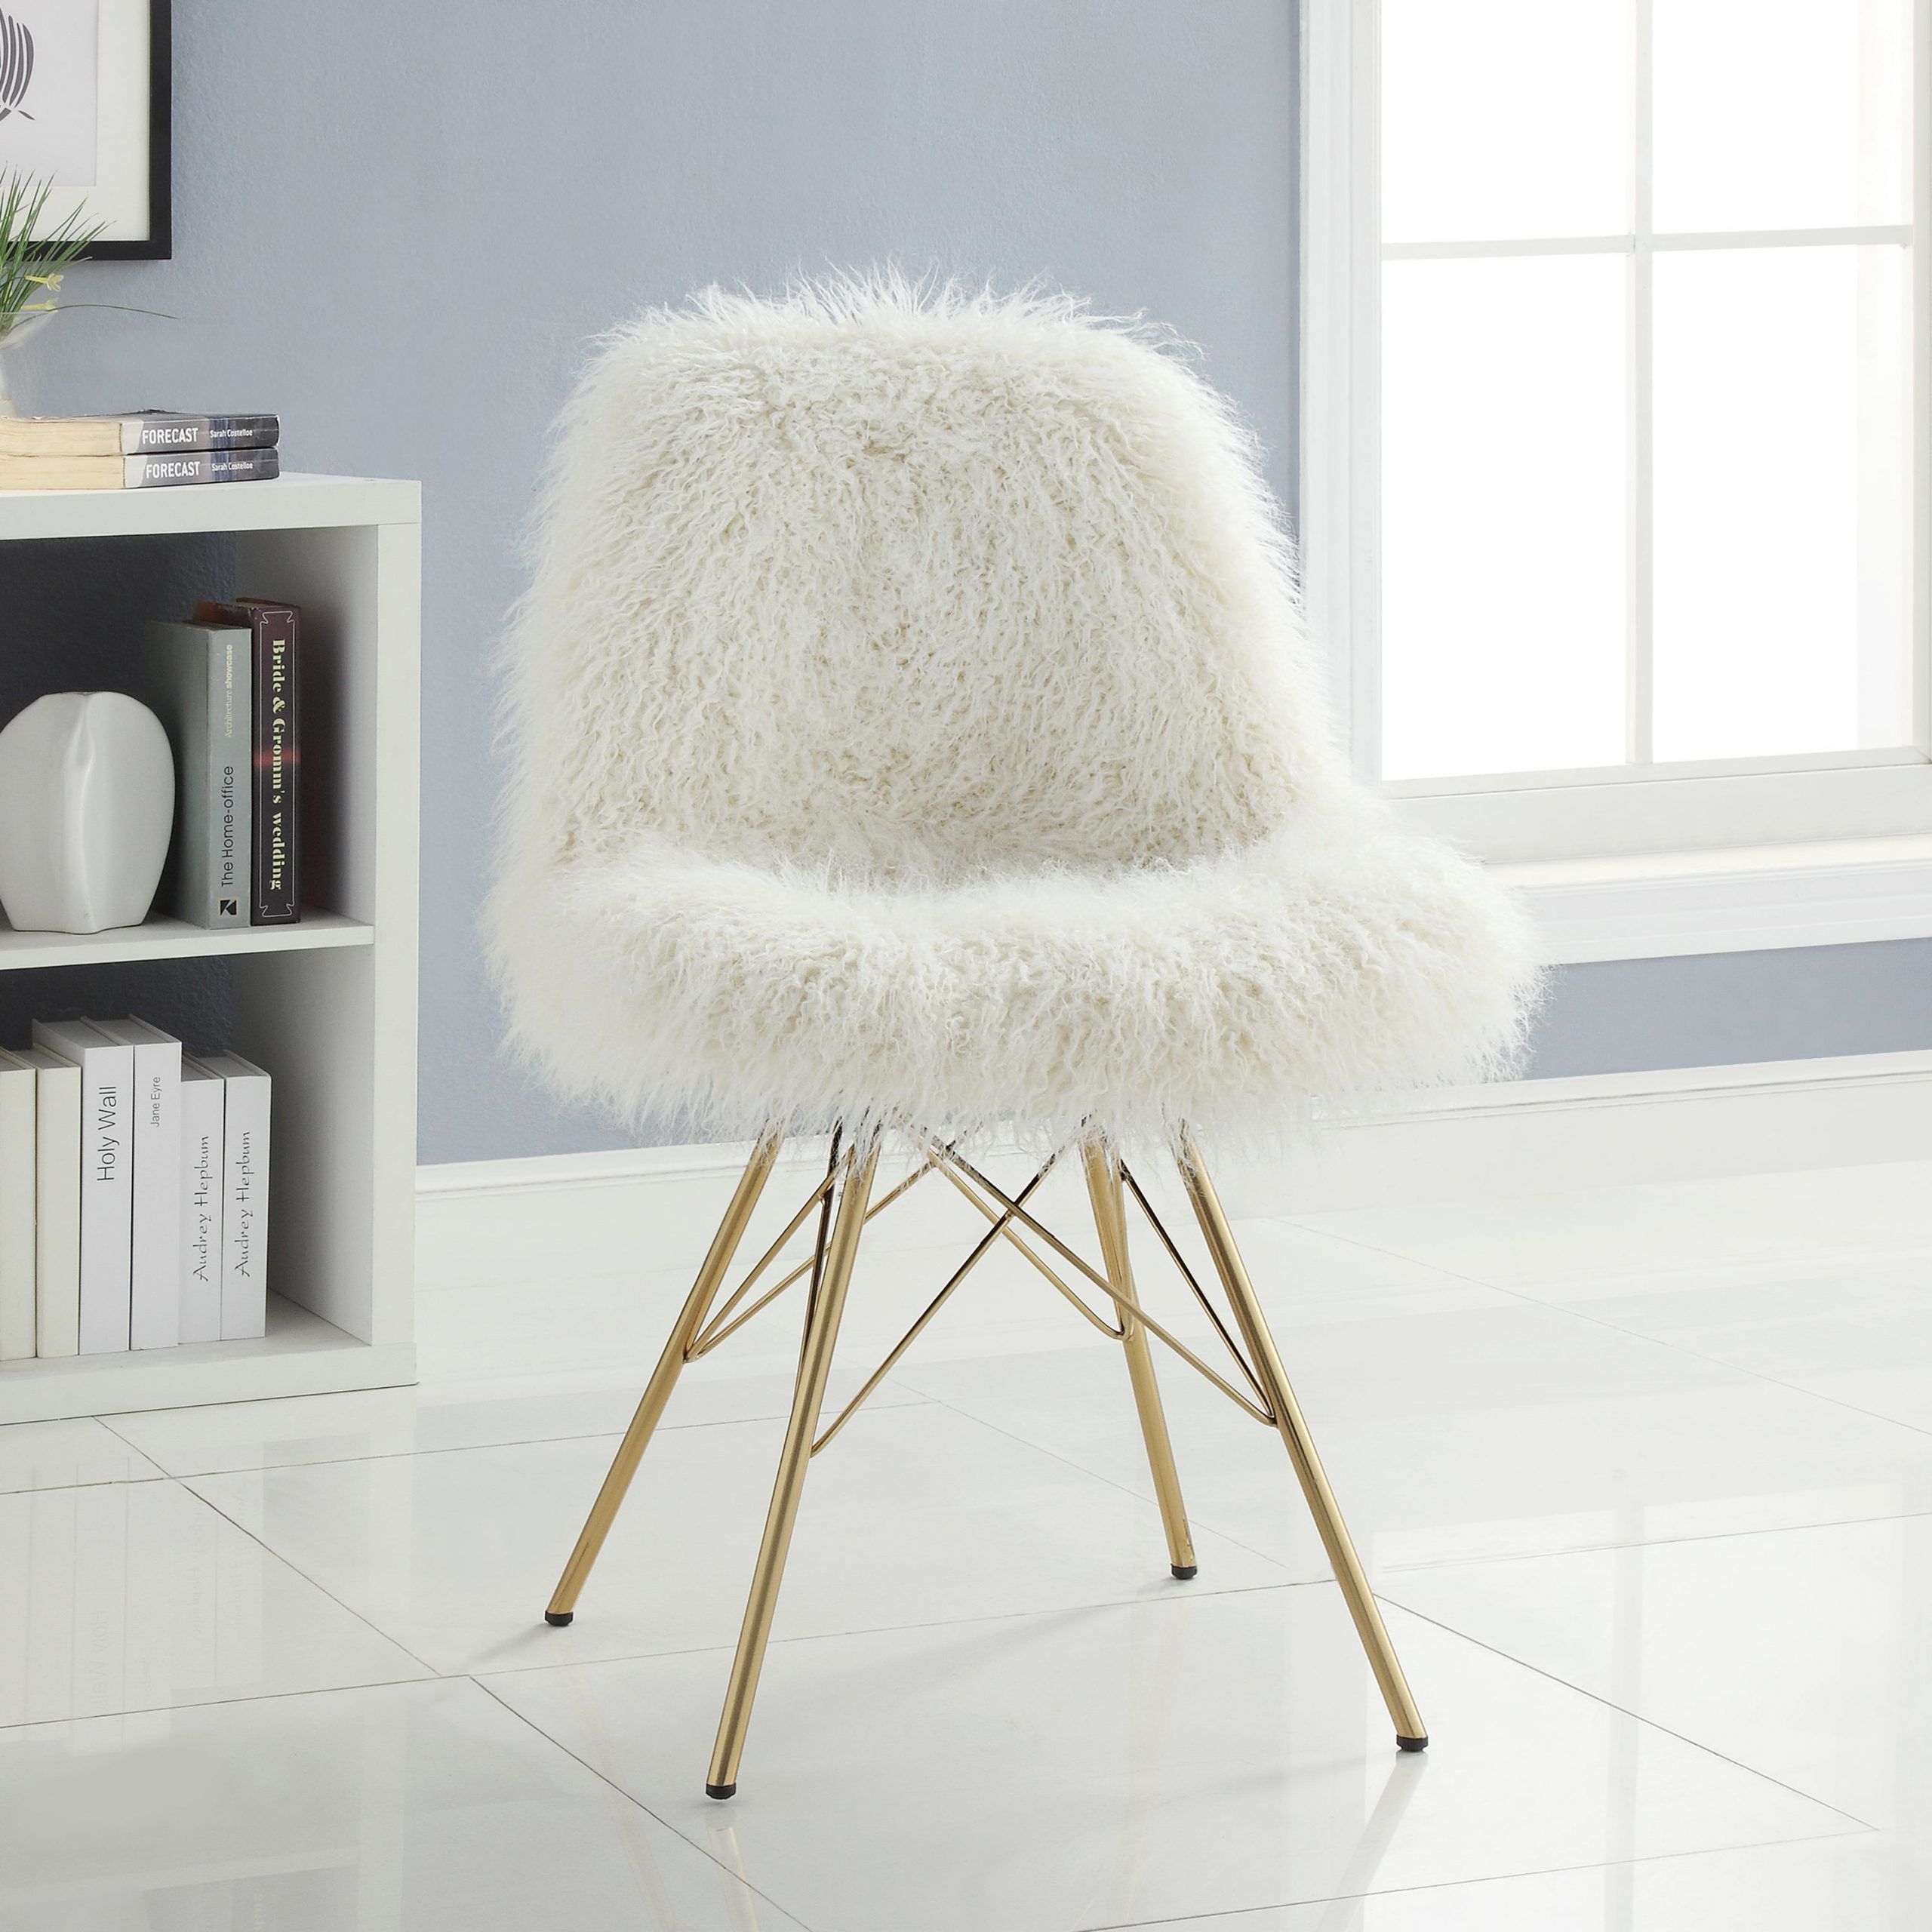 Dramatic And Bold, The Remy Faux Fur Chair Is A Trendy Addition To A For Lack Faux Fur Round Accent Stools With Storage (View 15 of 20)